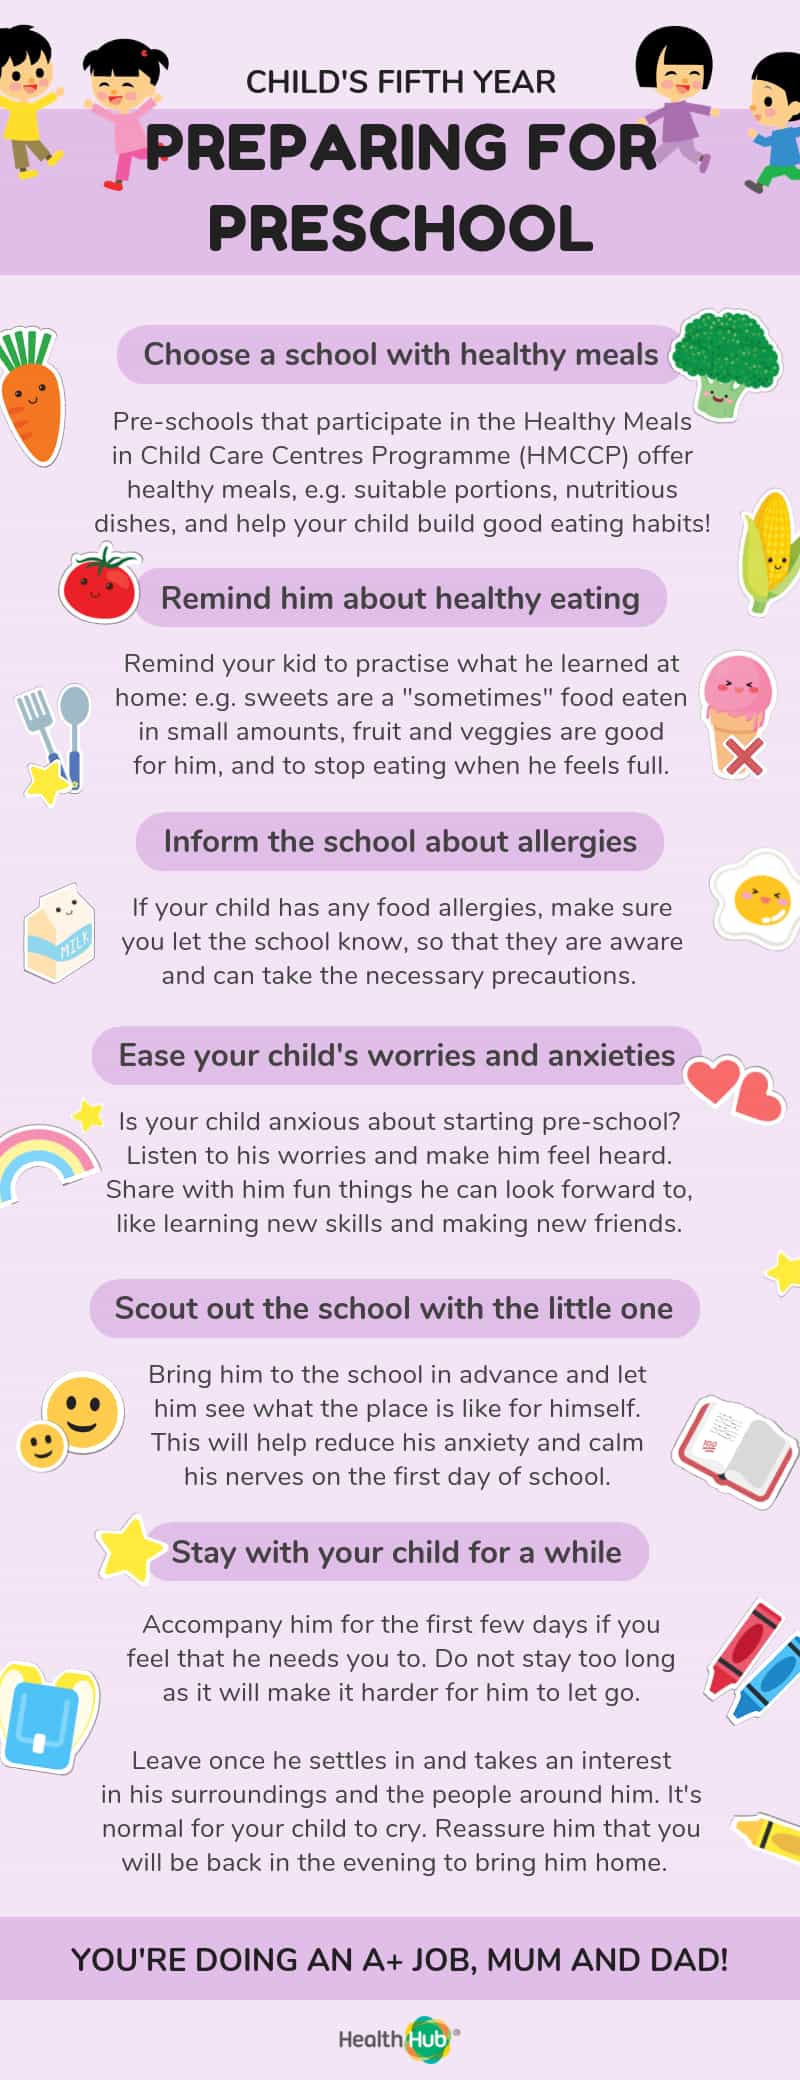 Pre-school preparations for a 5-year-old include checking with the pre-school about healthy food and healthy eating habits.